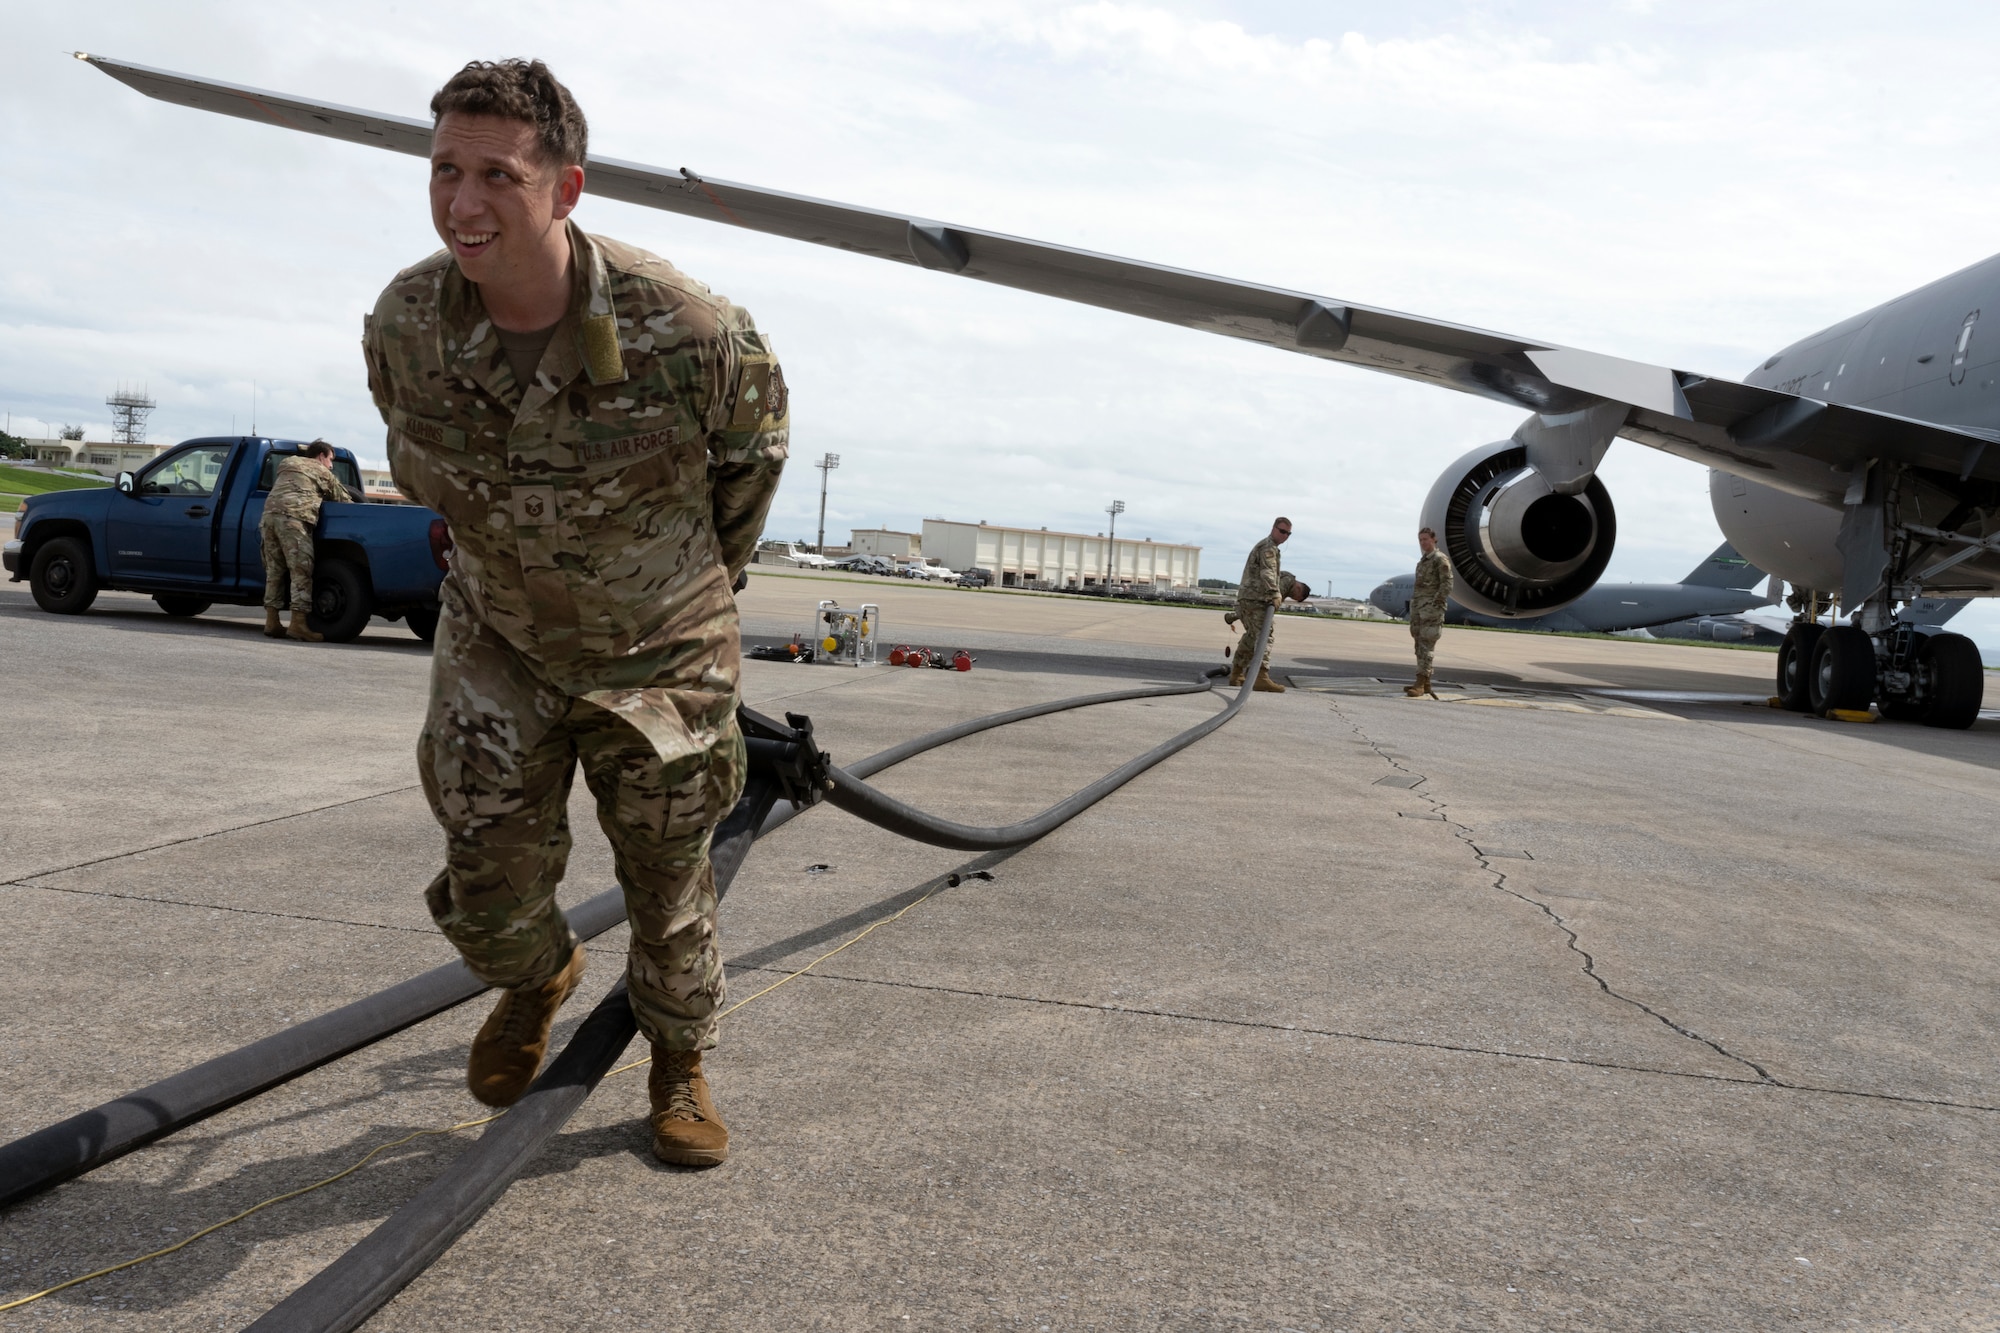 Master Sgt. Trevor Kuhns, 22nd Air Refueling Wing Agile Combat Employment team lead, extracts the remaining jet fuel in the lines to prevent fuel spillage during a test of a new fueling concept June 7, 2022, at Kadena Air Base, Japan. In support of the ACE initiative, the test involved sending gas from the tanker to the truck and could possibly open up the door for extensive future refueling operations. The McConnell aircrew and maintenance personnel visited with their counterparts to showcase KC-46A Pegasus capabilities for fuels servicing, cargo, and aeromedical evacuation. (U.S. Air Force photo by Master Sgt. John Gordinier)